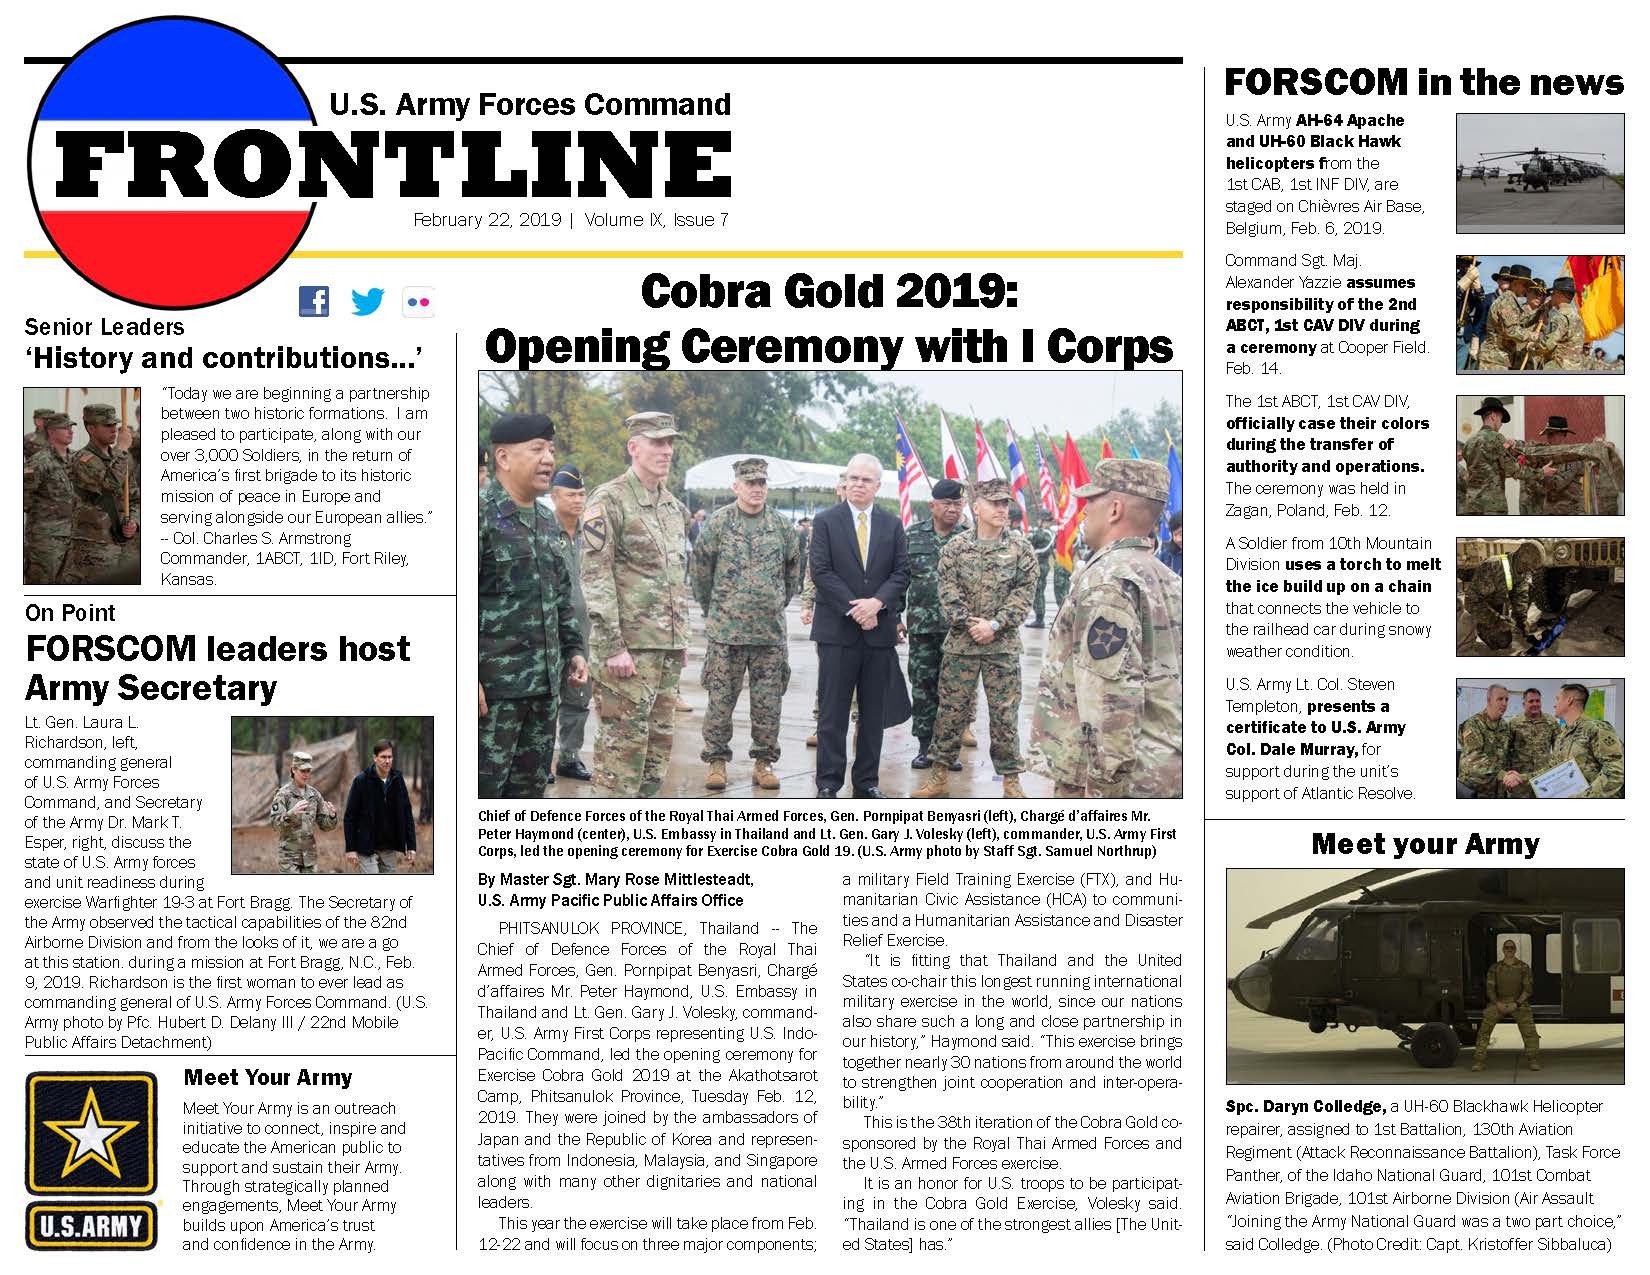 Forscom Frontline Feb 22 19 Article The United States Army